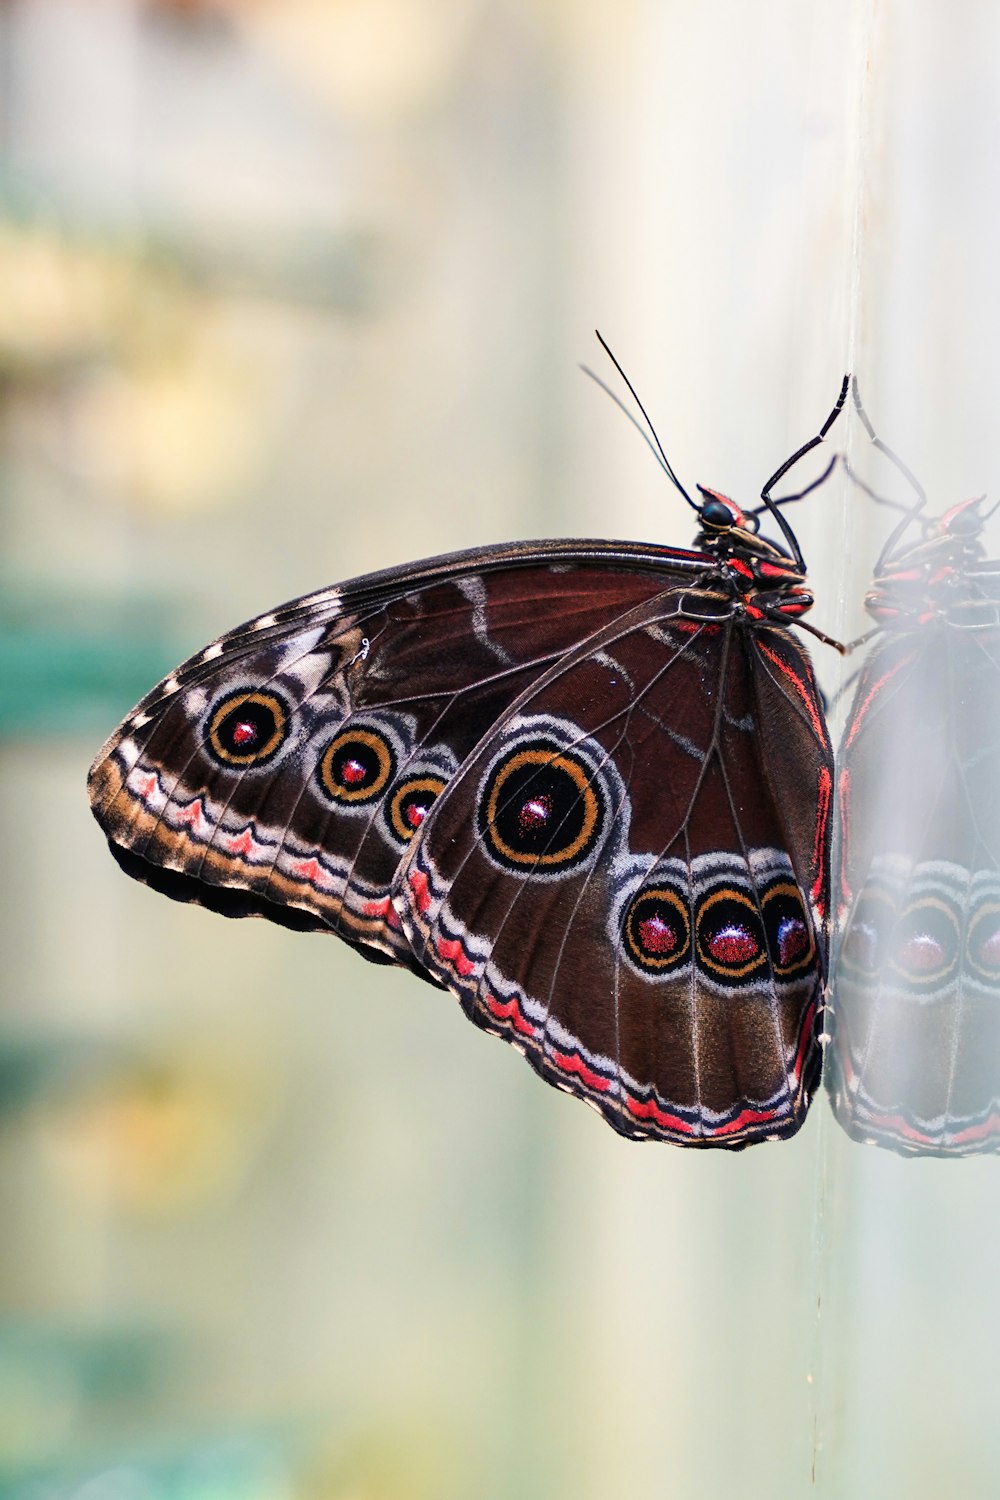 a butterfly on a glass